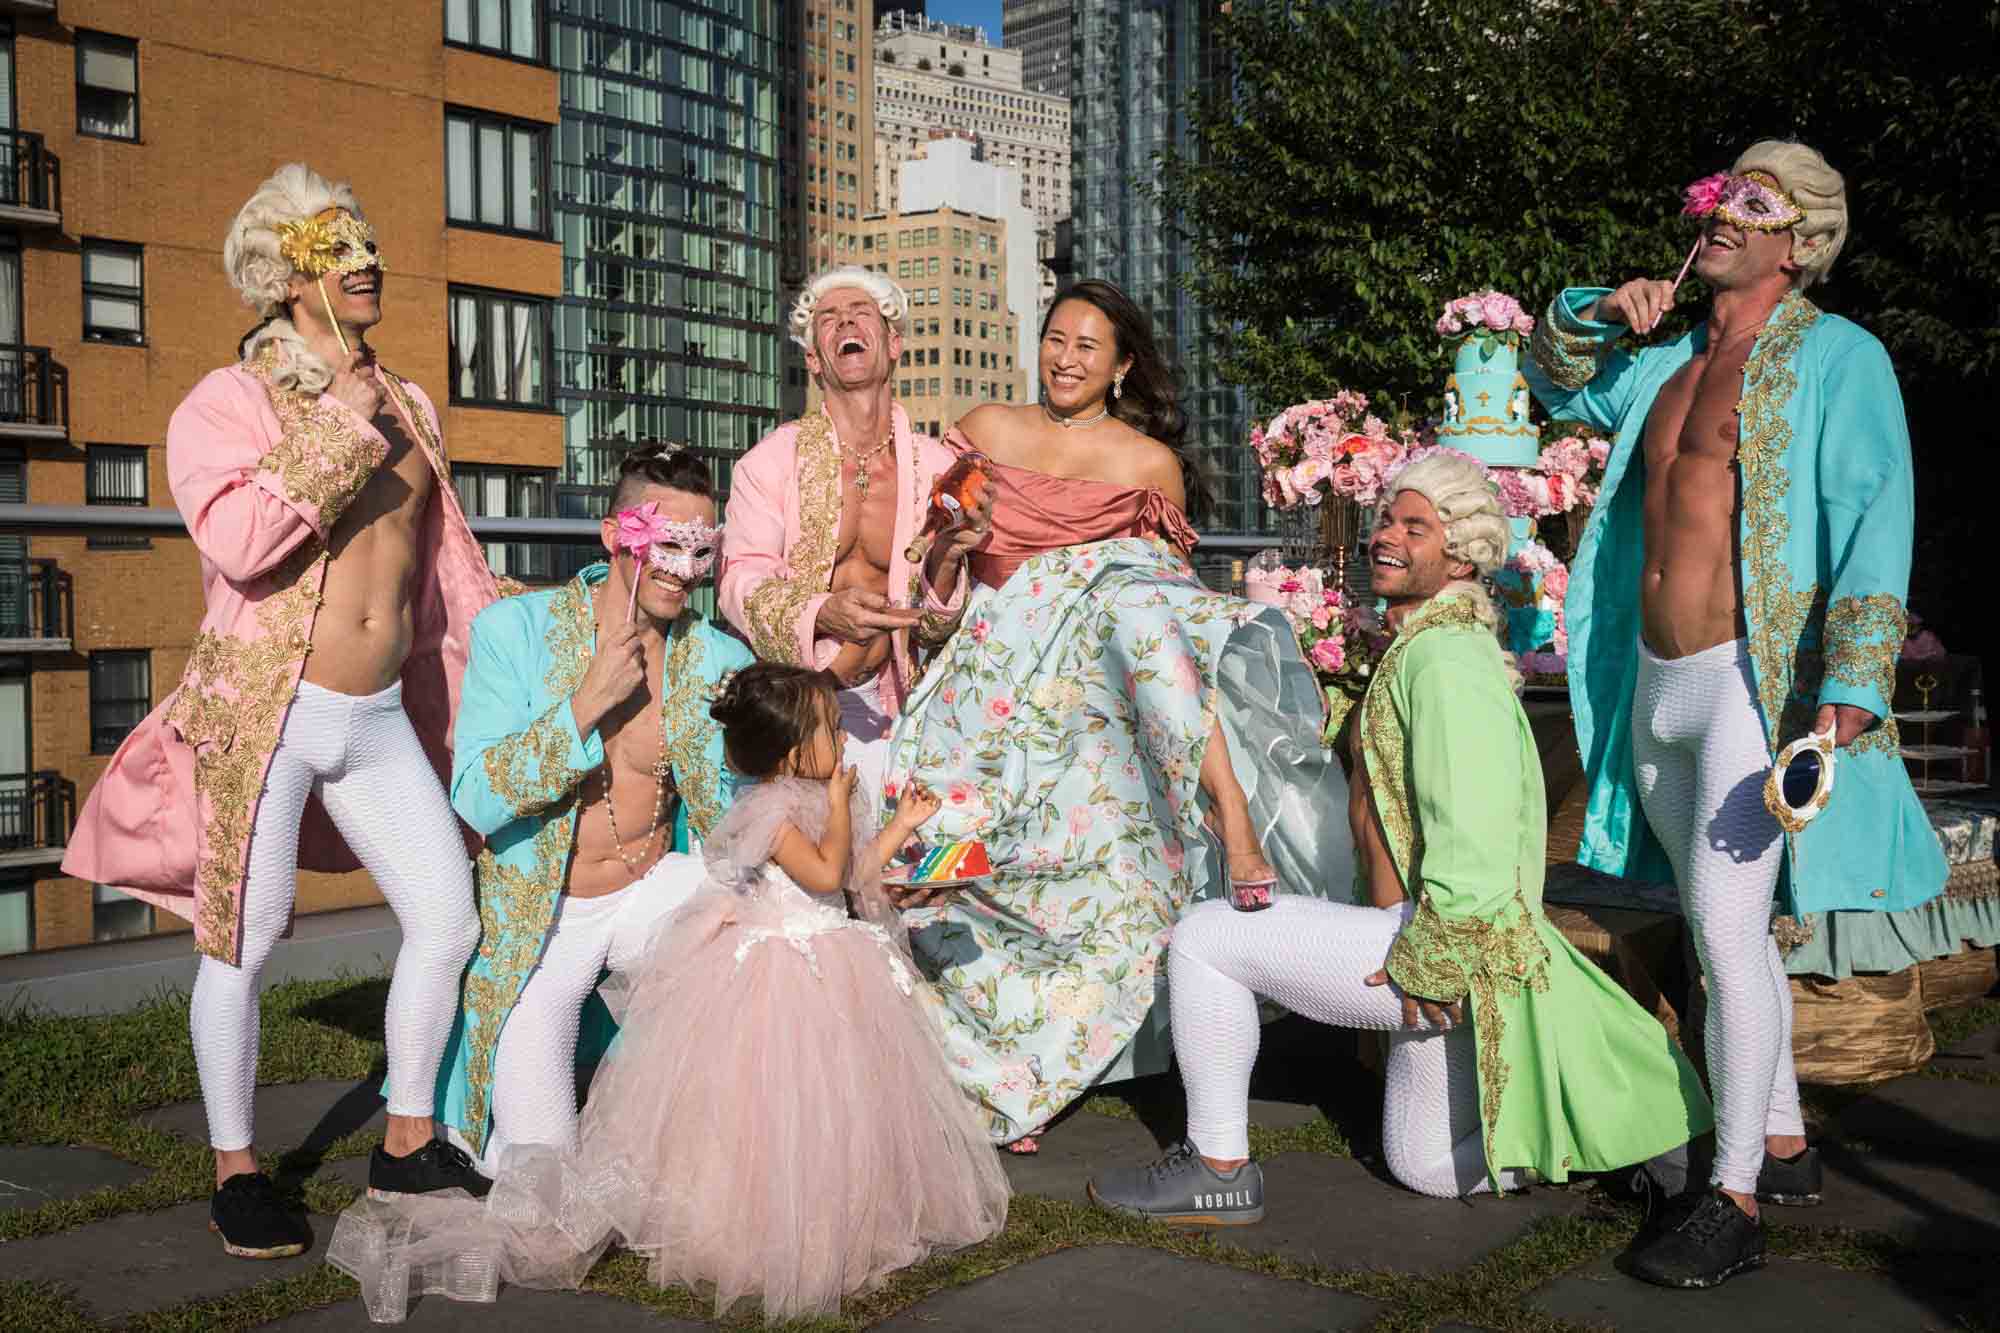 Woman and male guests dressed as Marie Antoinette and court for an article on event planning photography tips